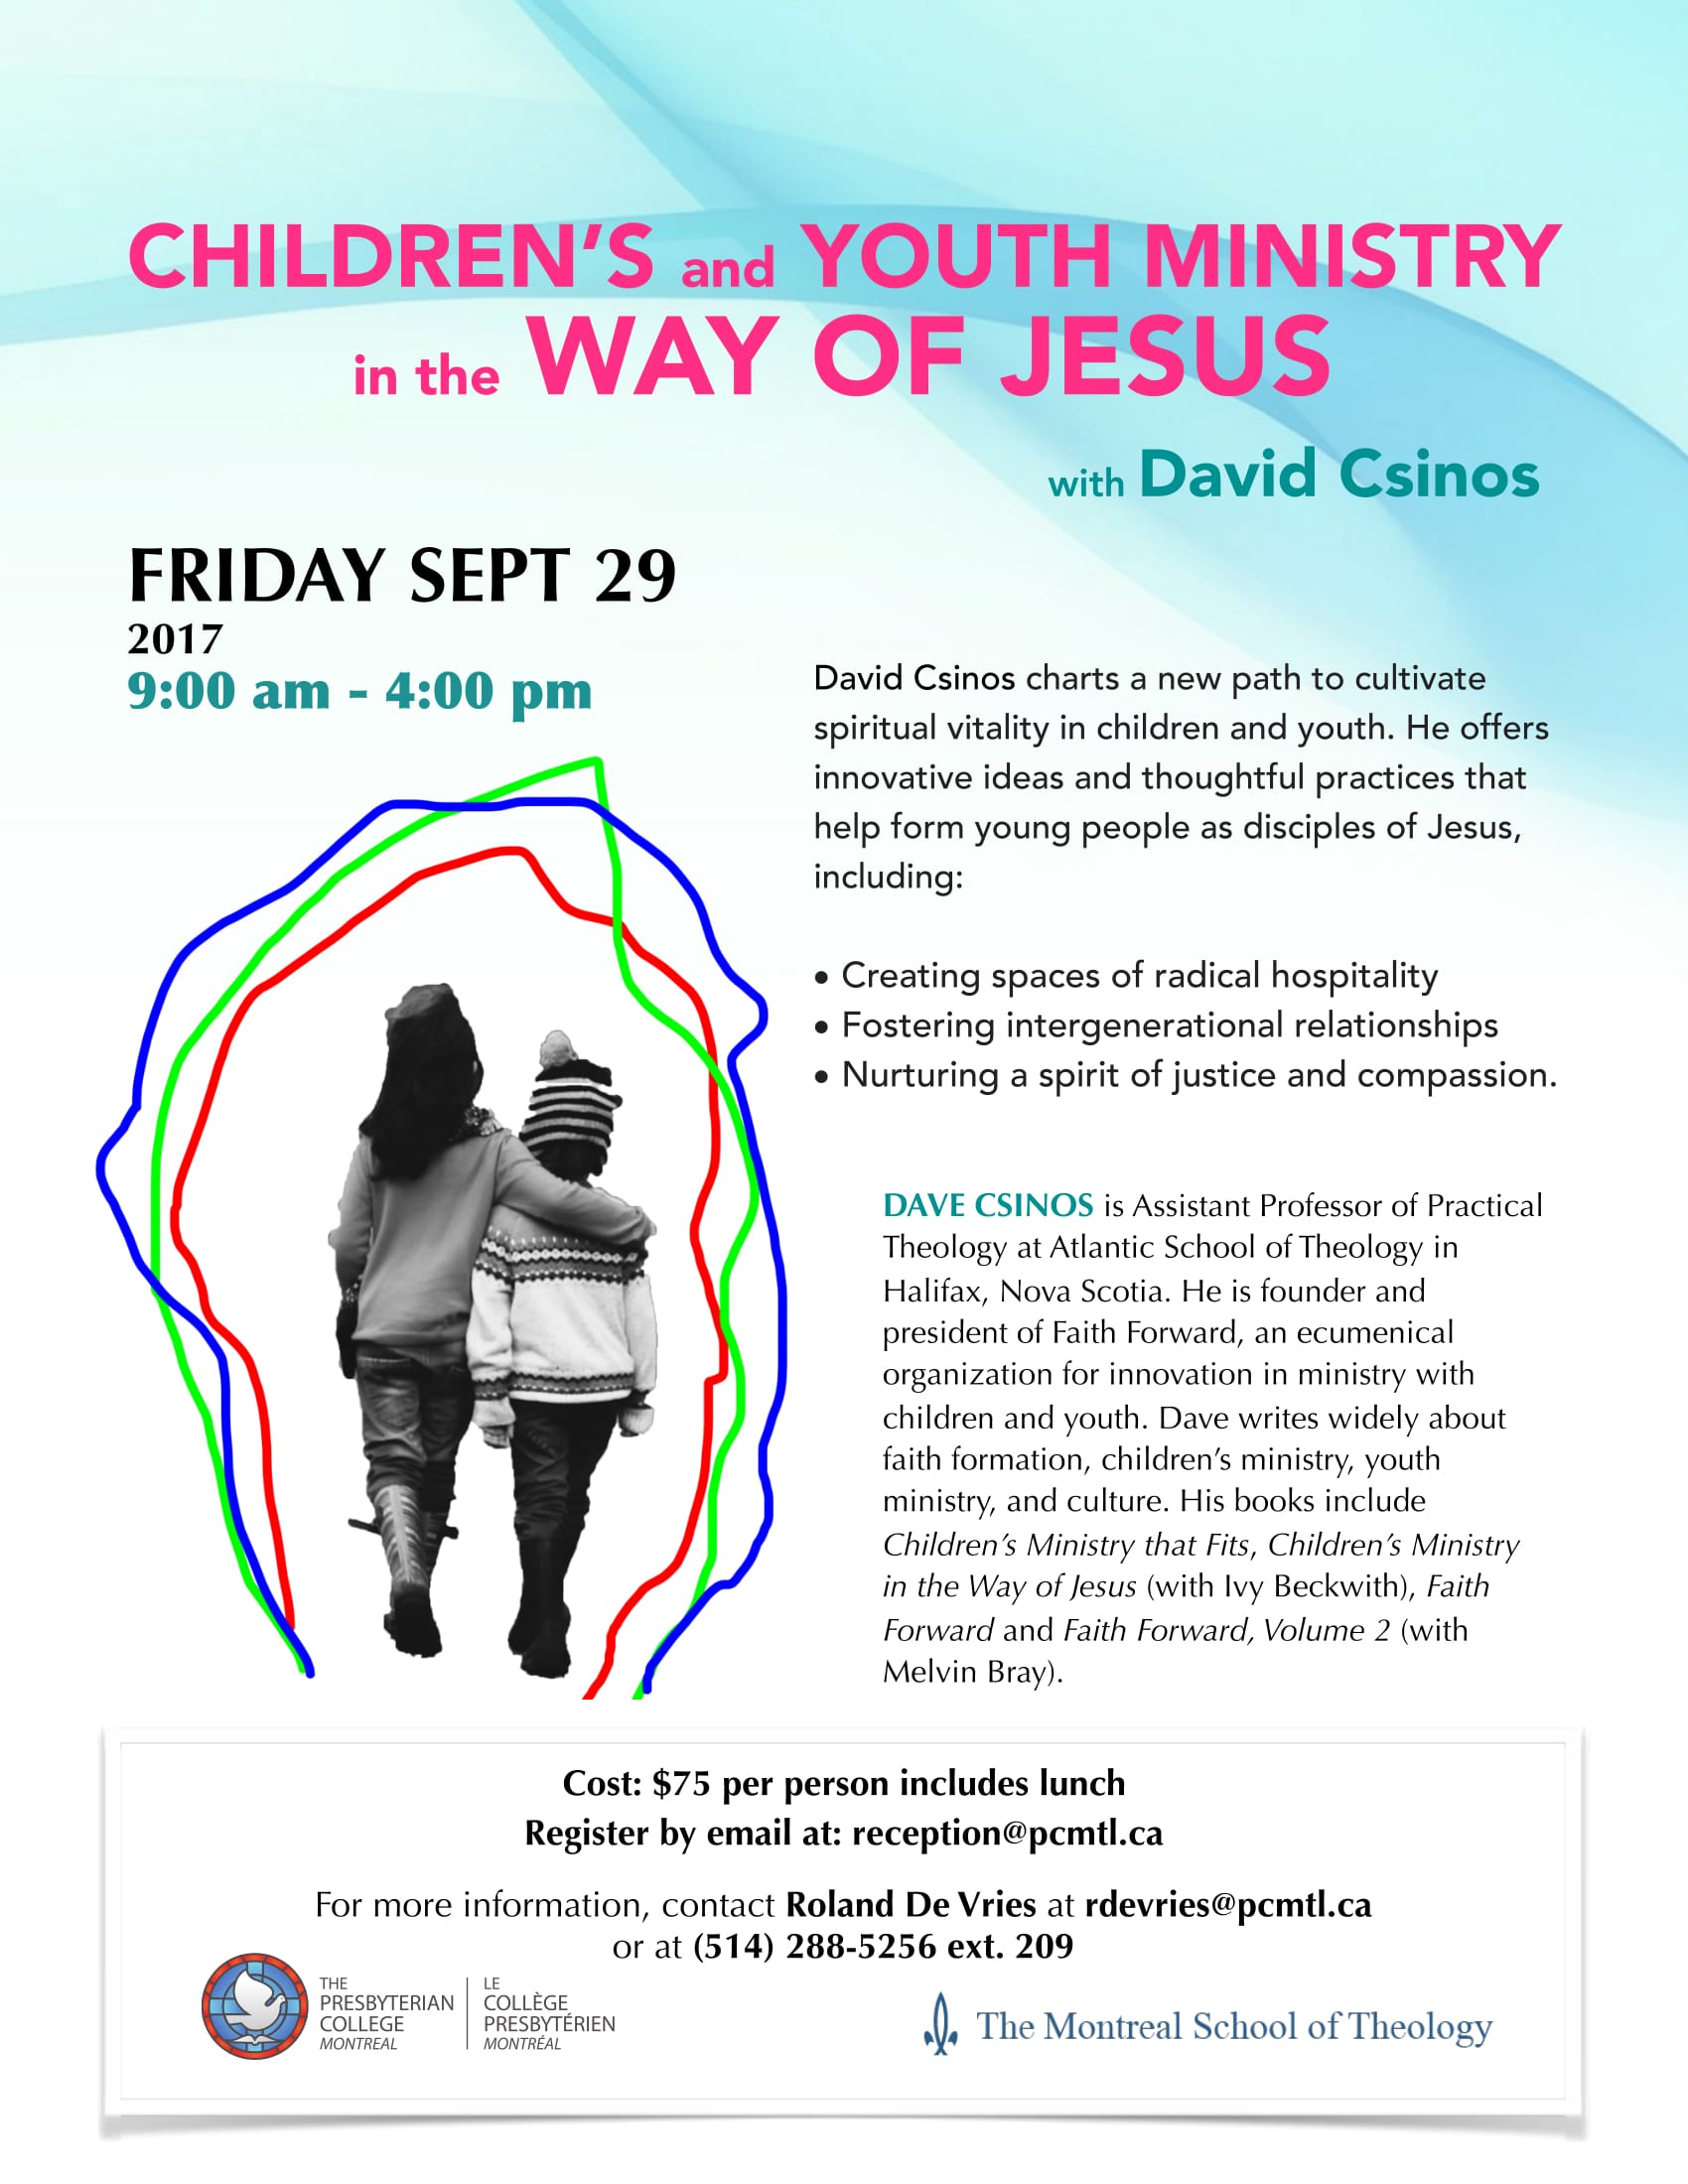 Workshop - CHILDREN’S and YOUTH MINISTRY in the WAY OF JESUS with David Csinos